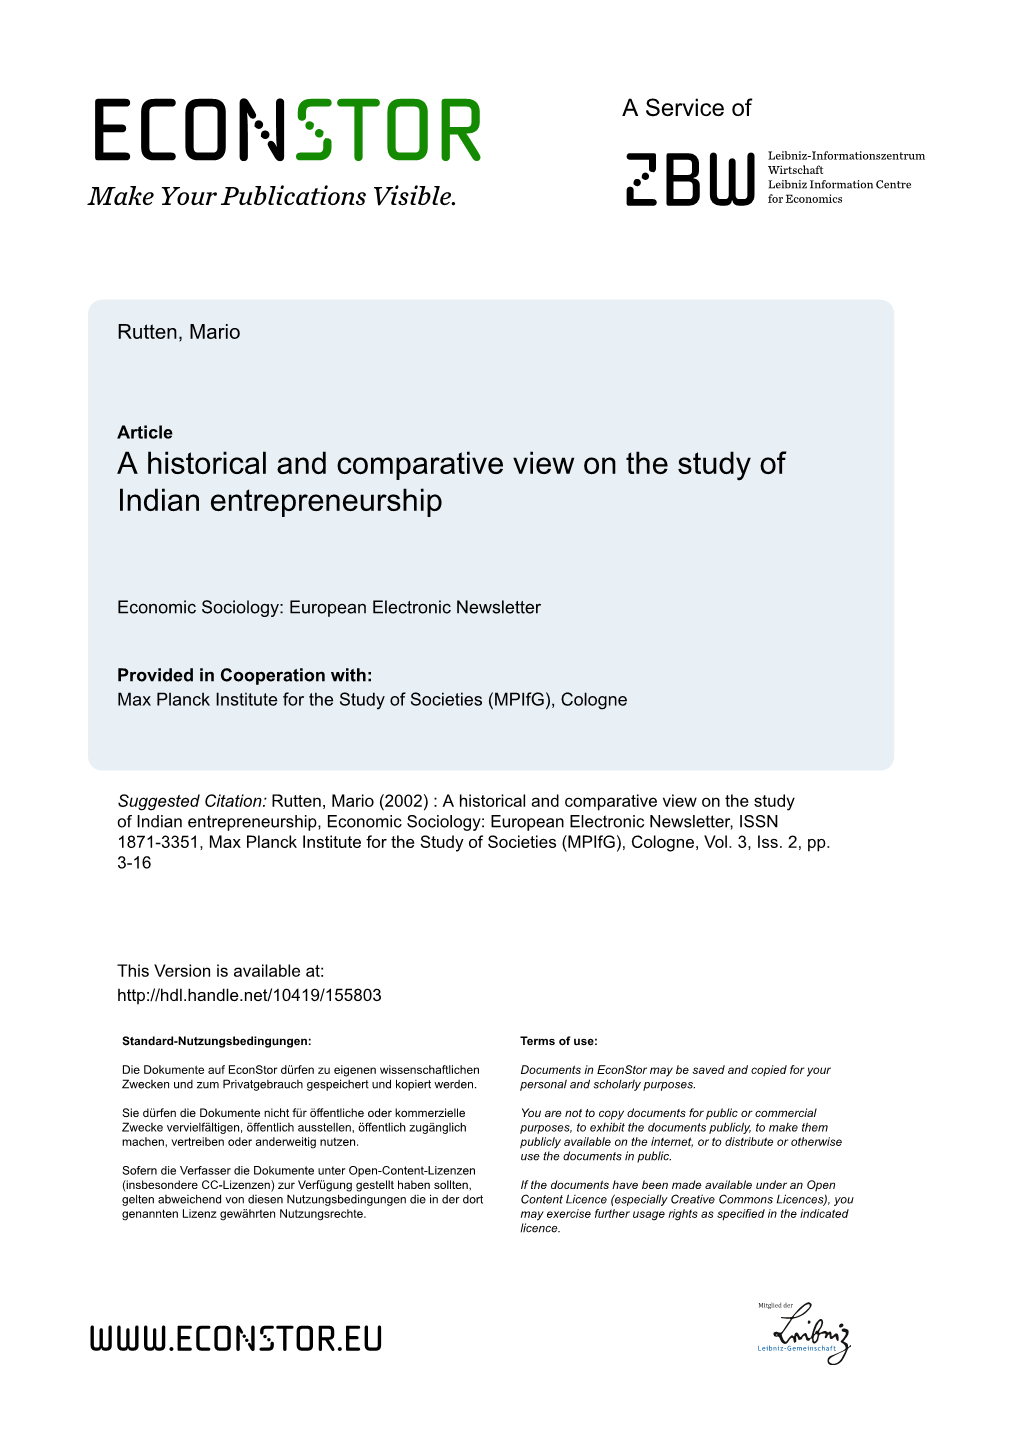 A Historical and Comparative View on the Study of Indian Entrepreneurship